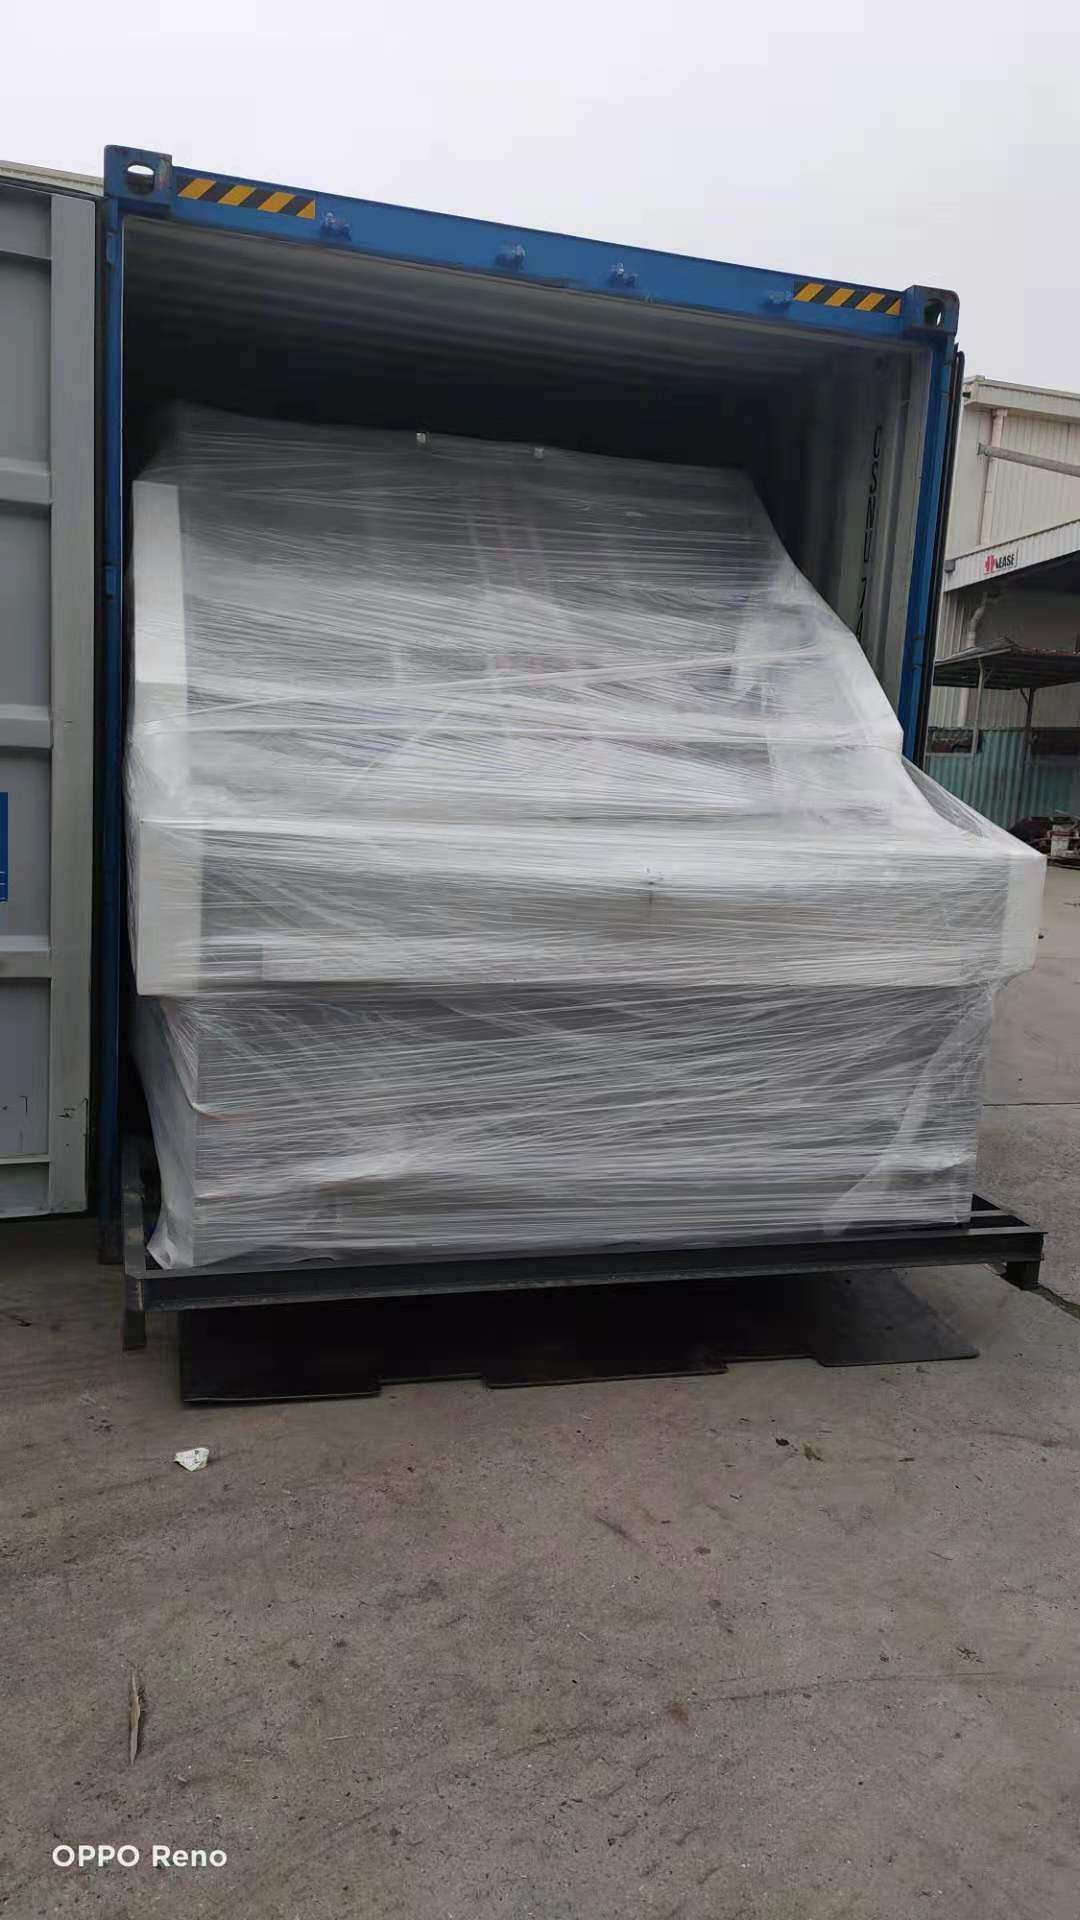 High Speed Servo Type Laminating Machine and Flip Flop Stacking Machine Deliver to Polish Customer